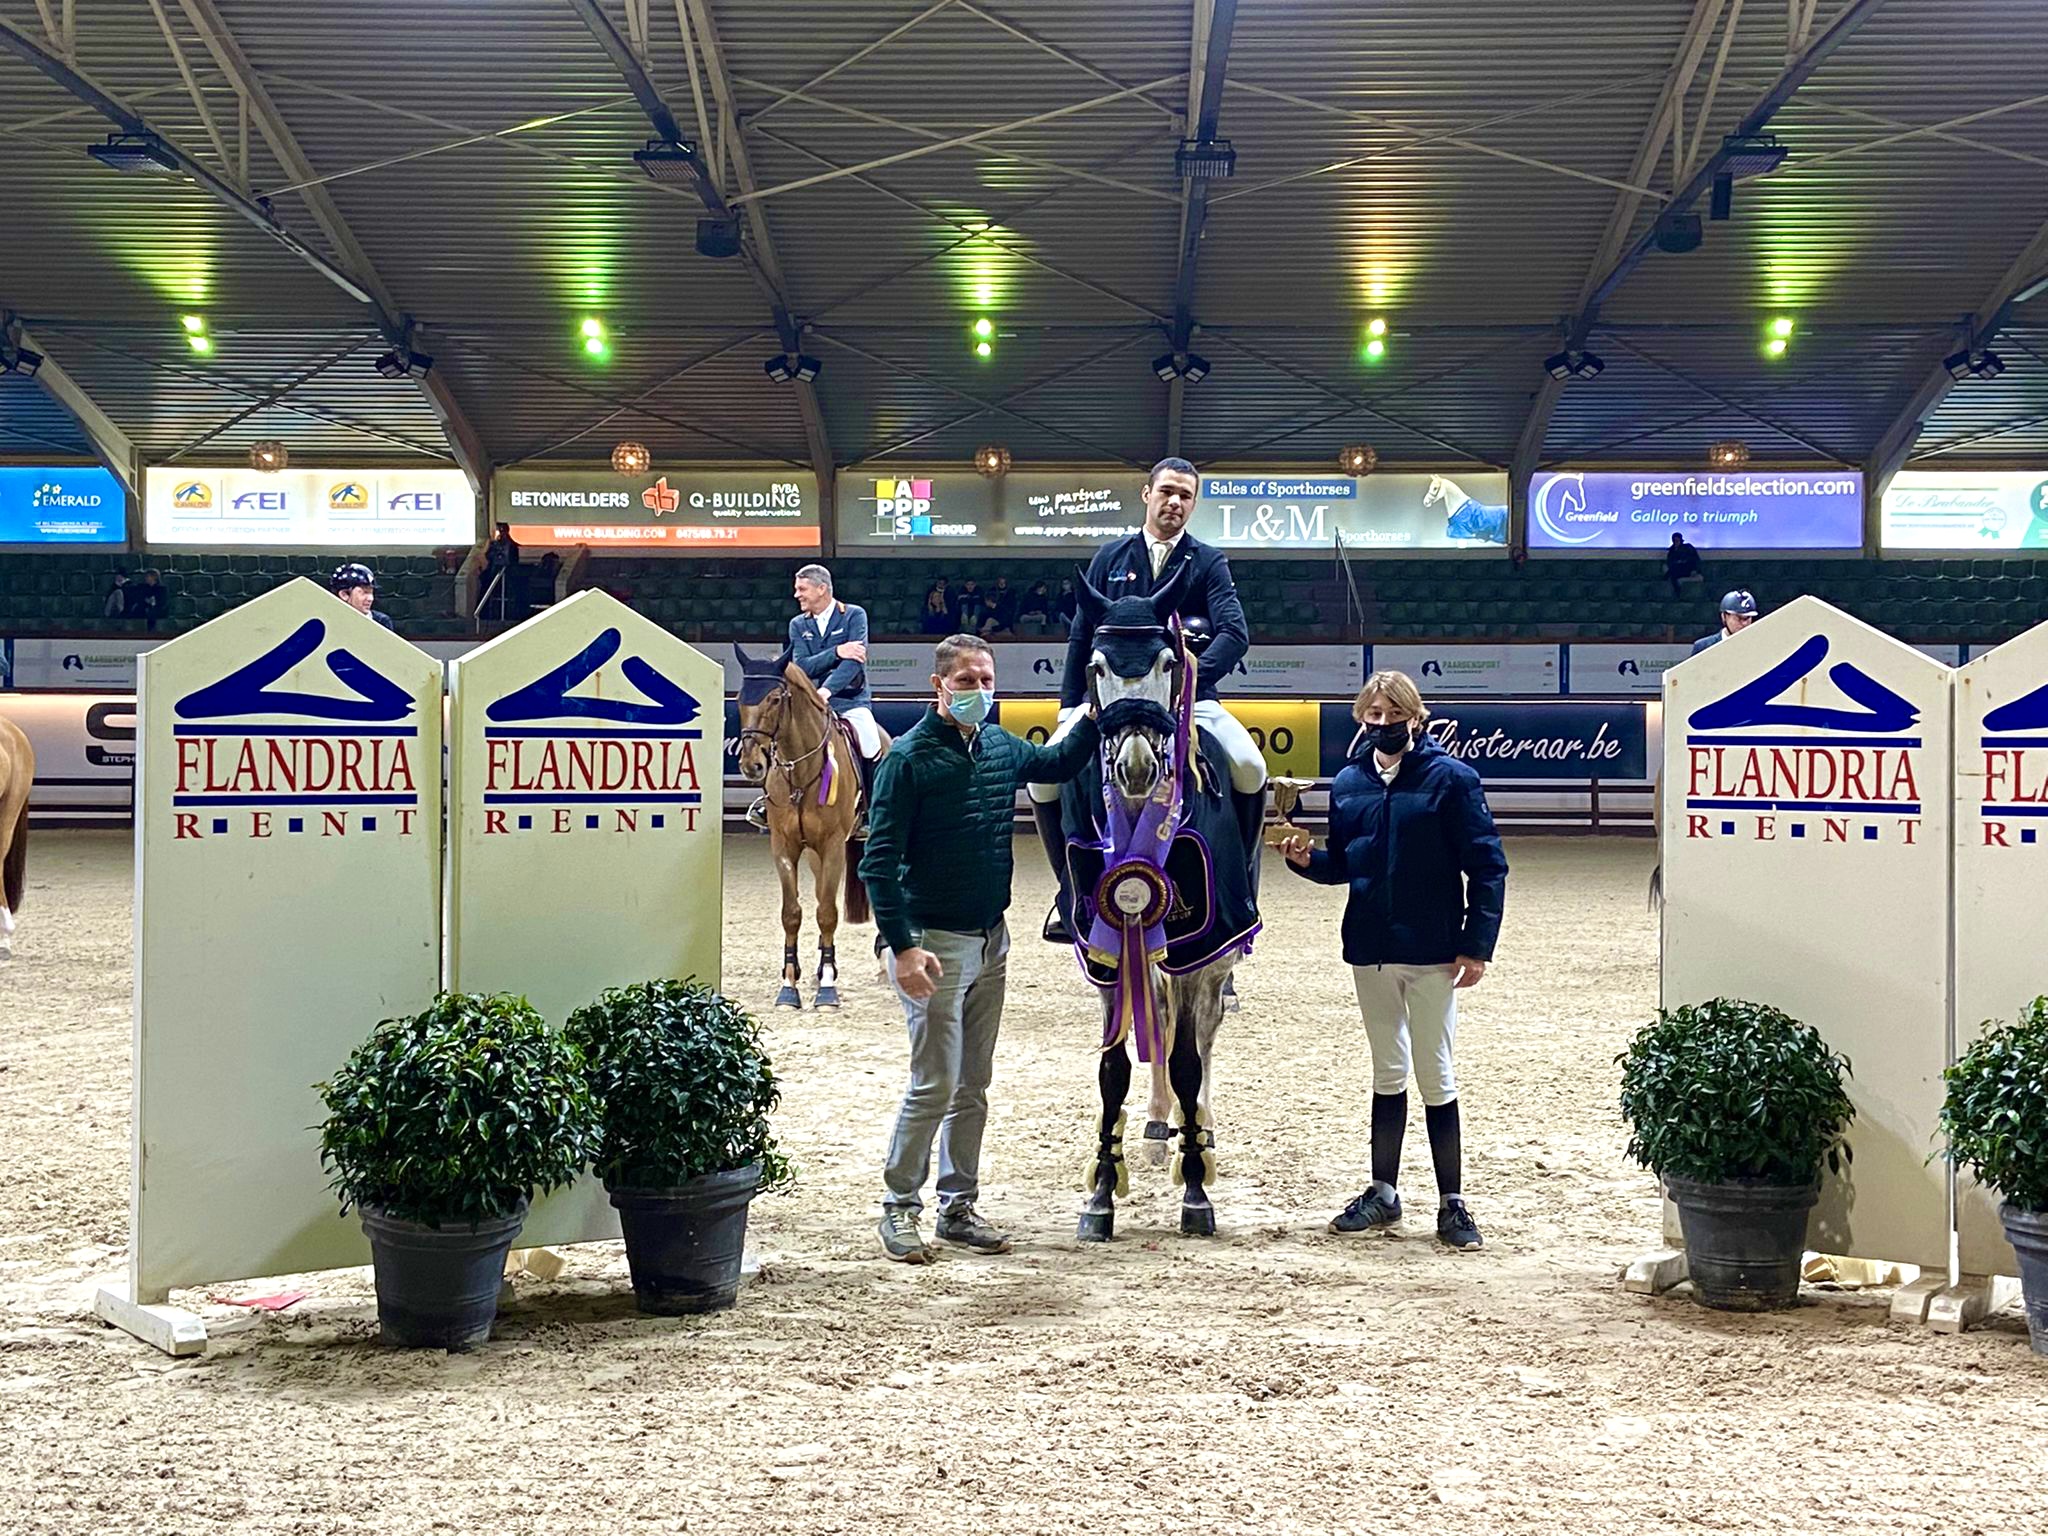 André Reichmann claims victory in the CSI2* Grand Prix in Lier